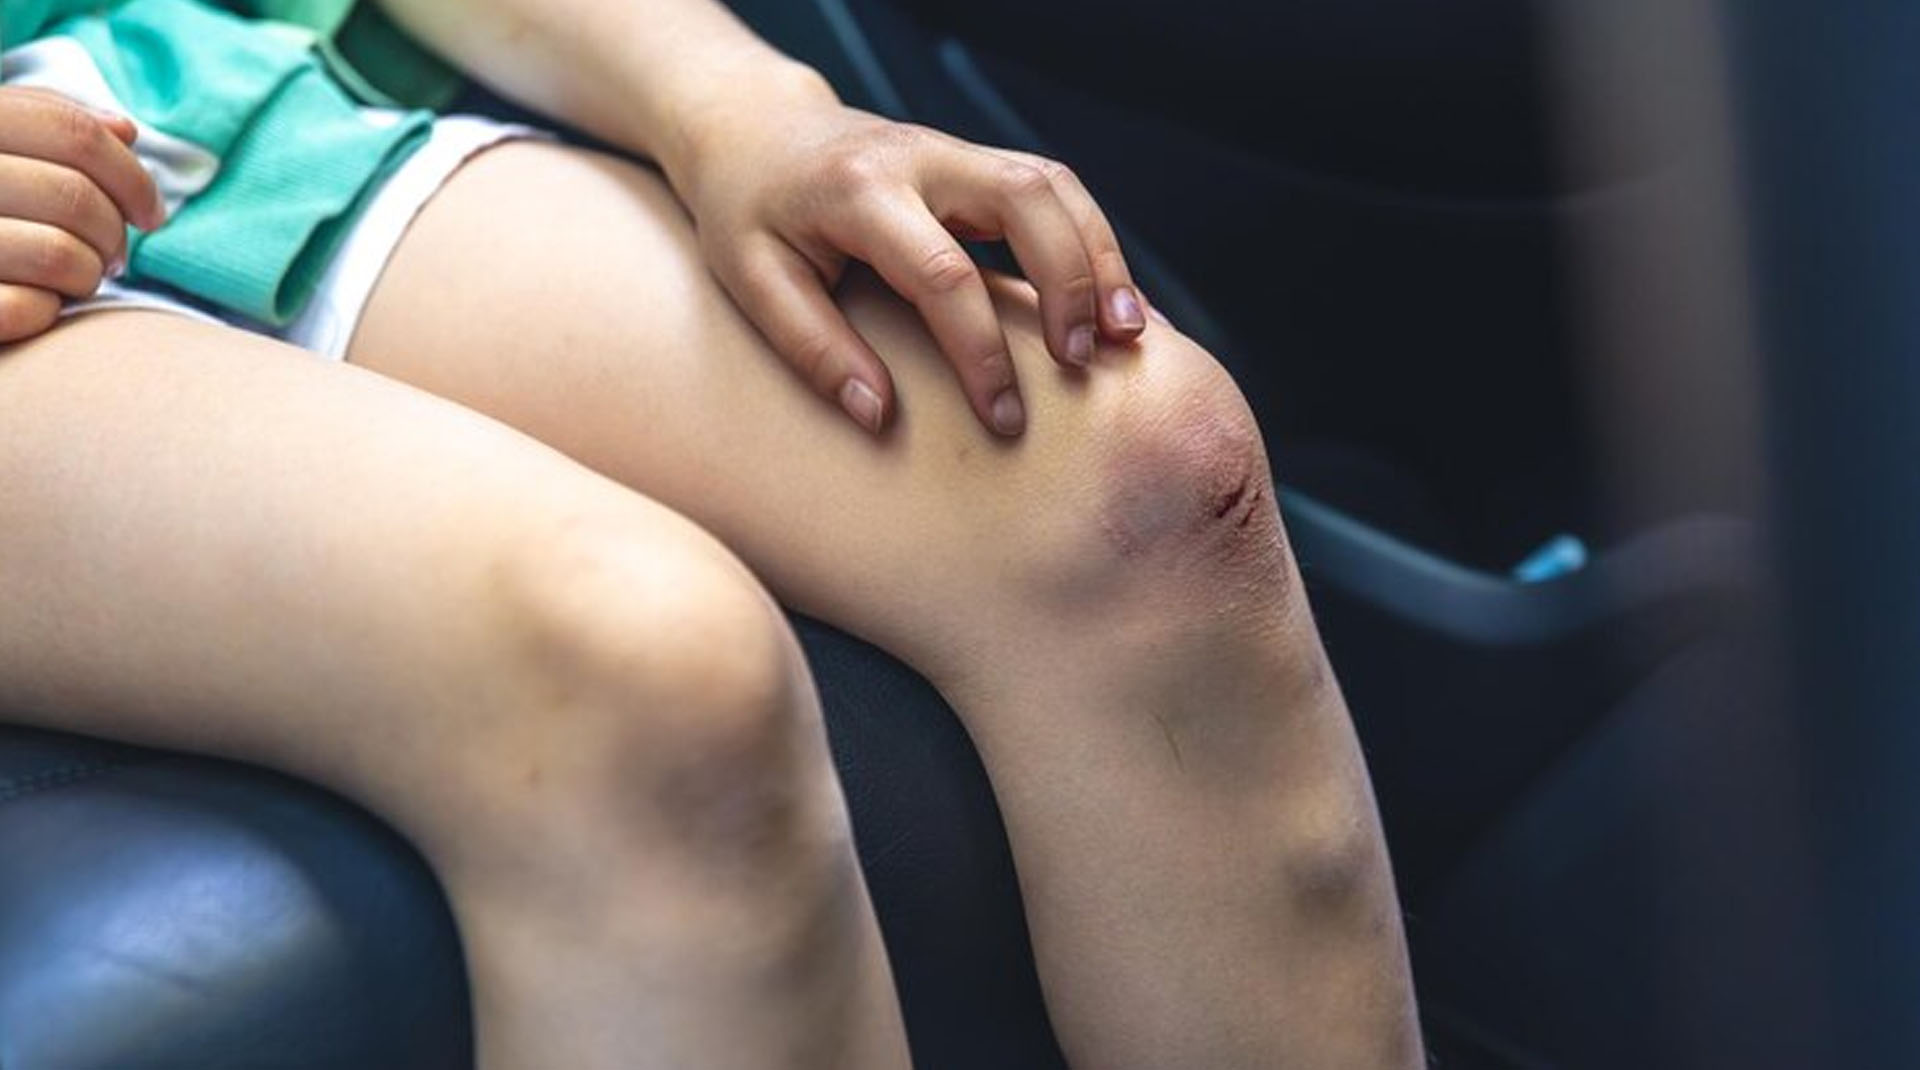 What are the Home Remedies for Bruises?